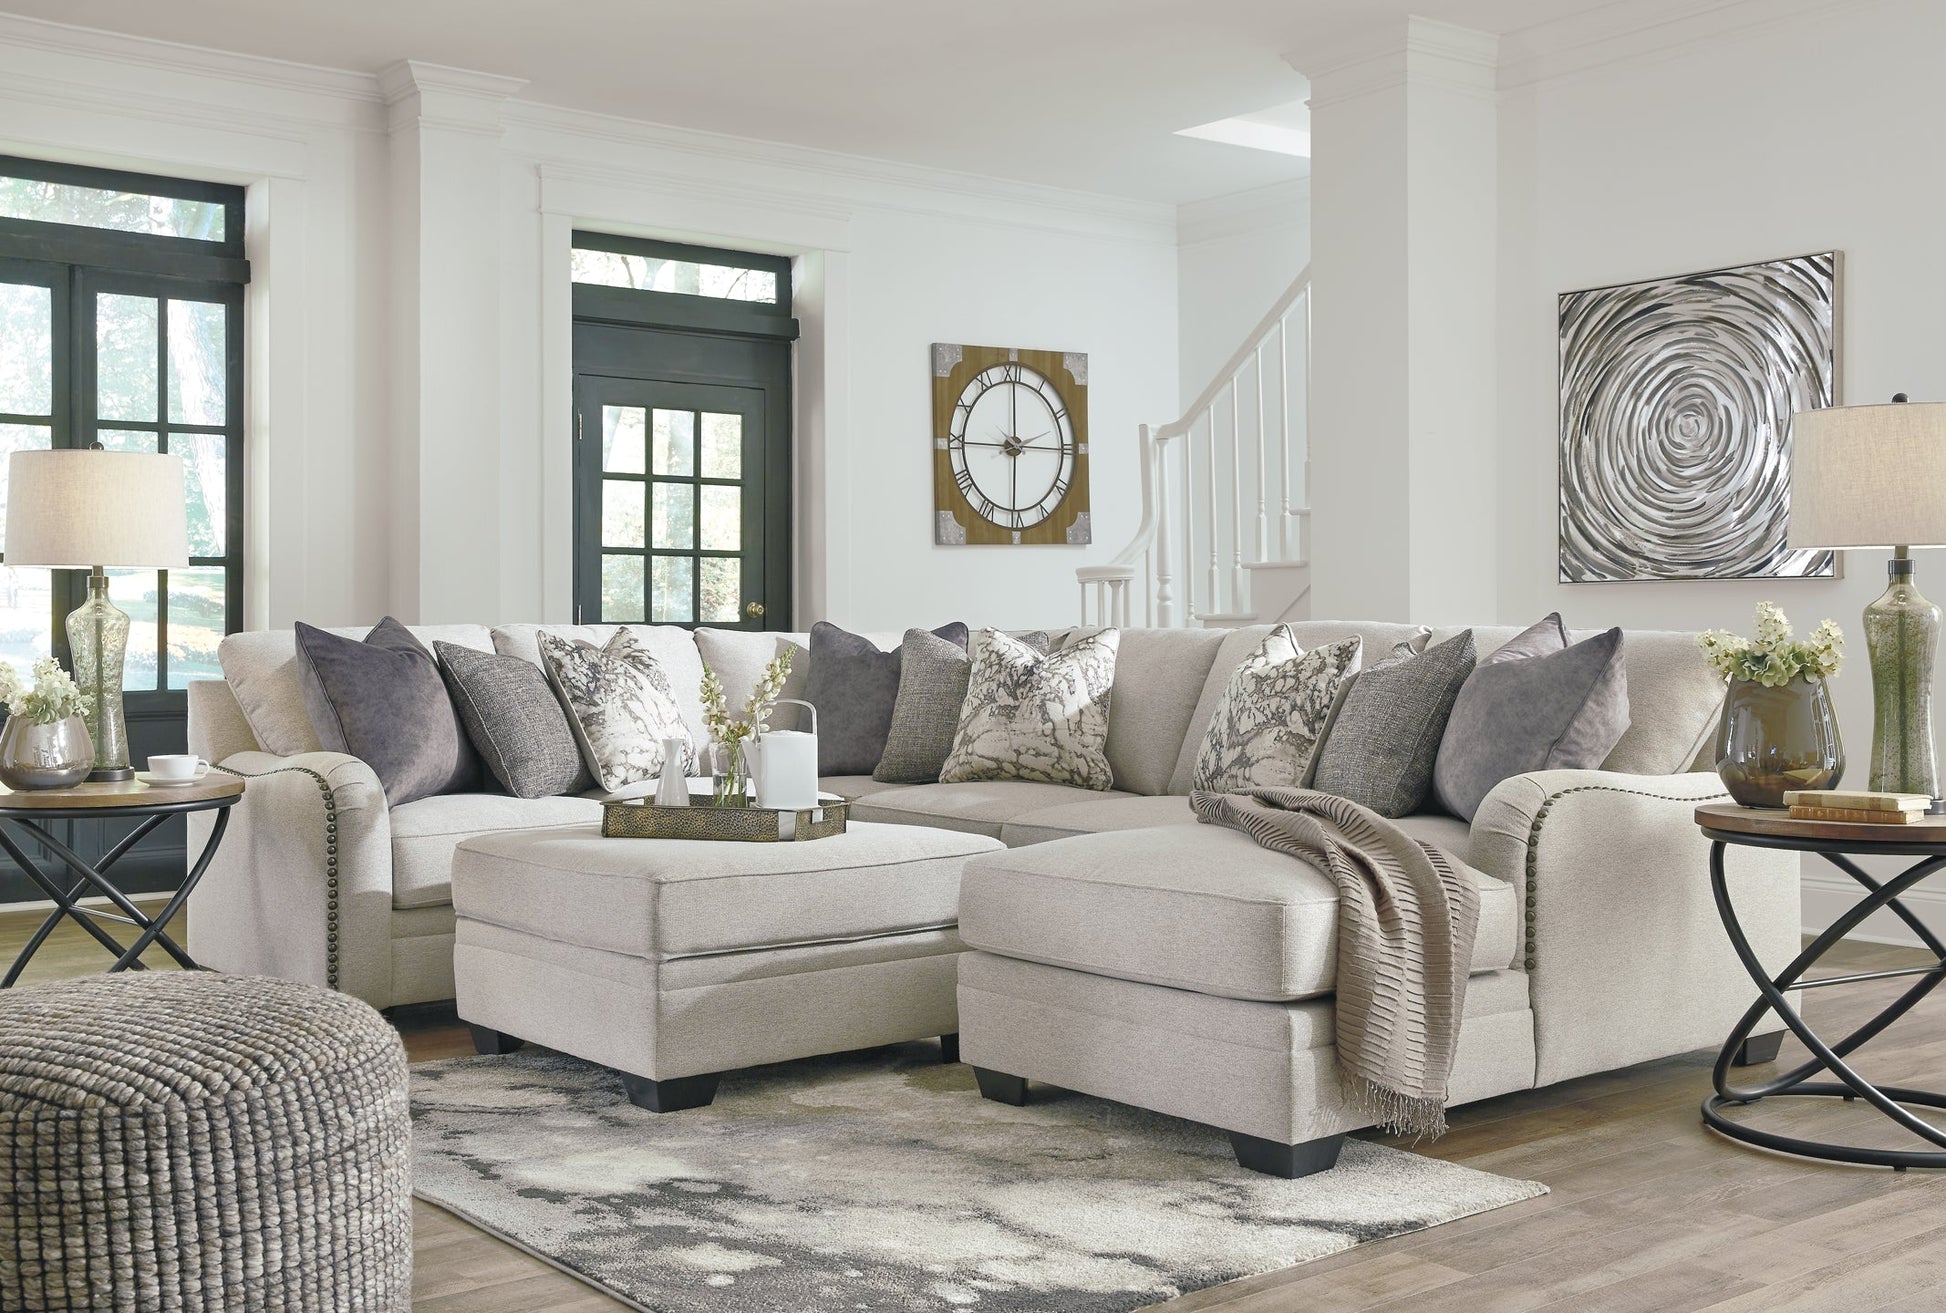 Dellara 4-Piece Sectional with Chaise at Cloud 9 Mattress & Furniture furniture, home furnishing, home decor